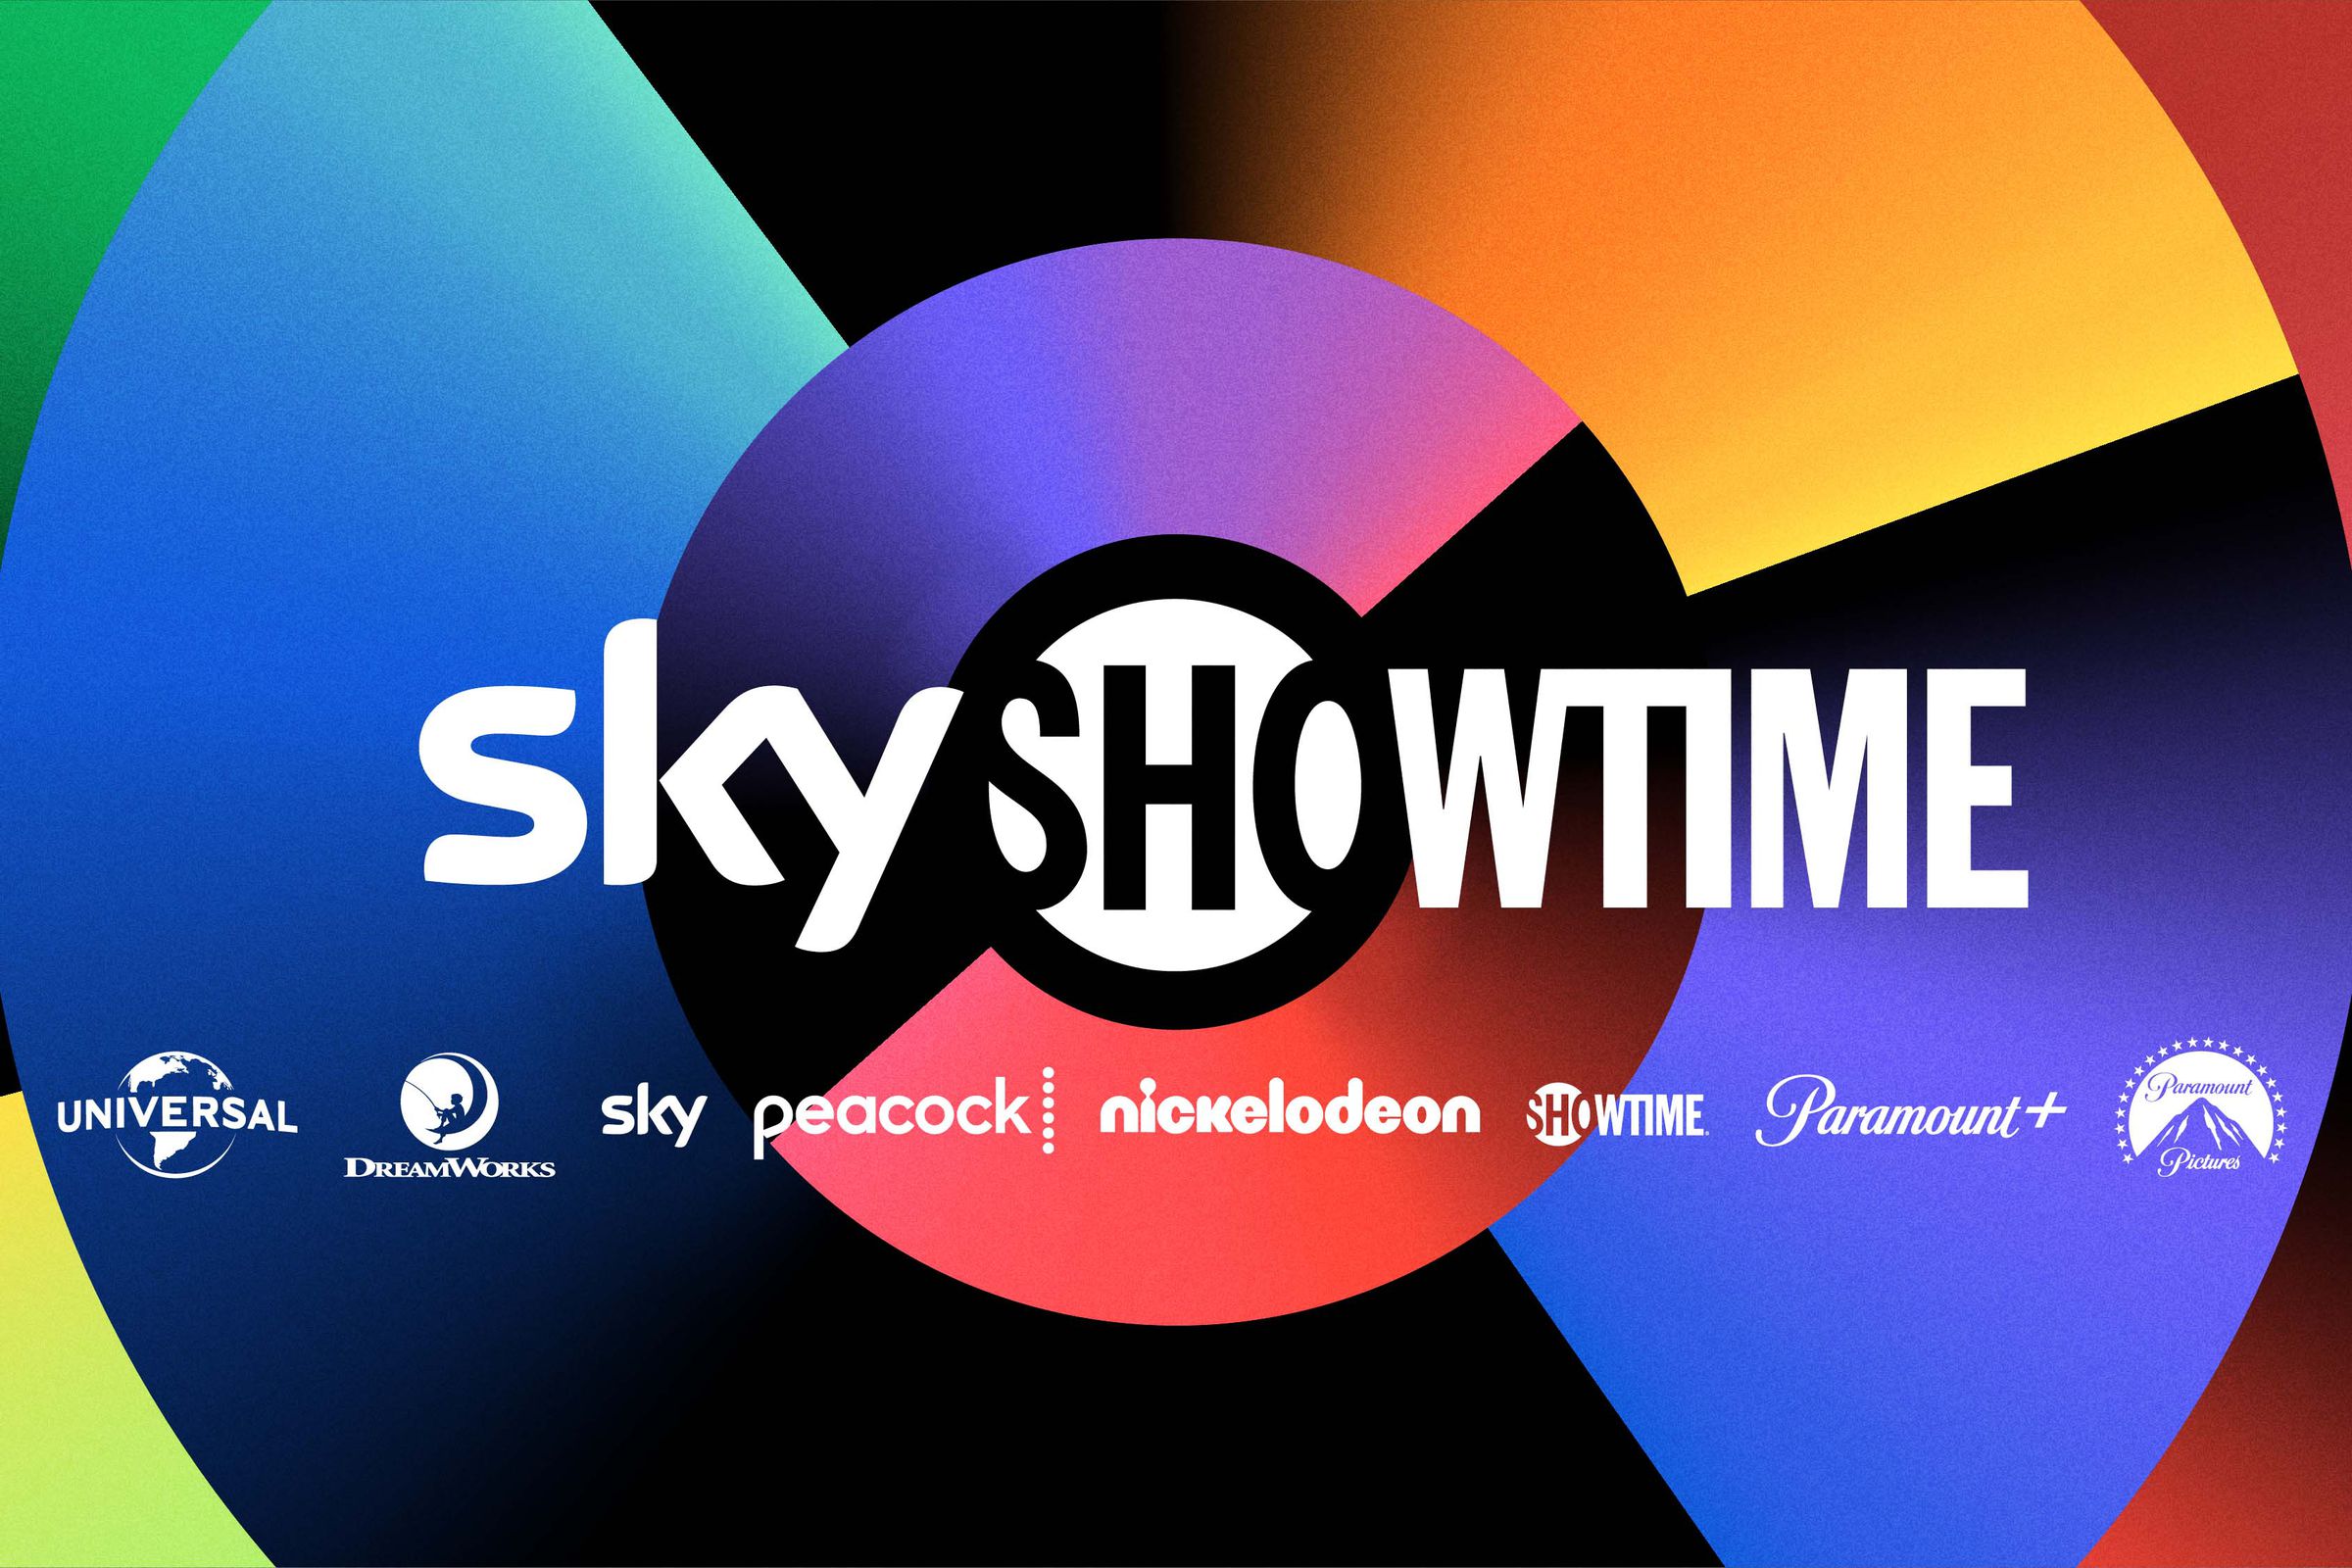 The SkyShowtime logo and logos for its content partners.